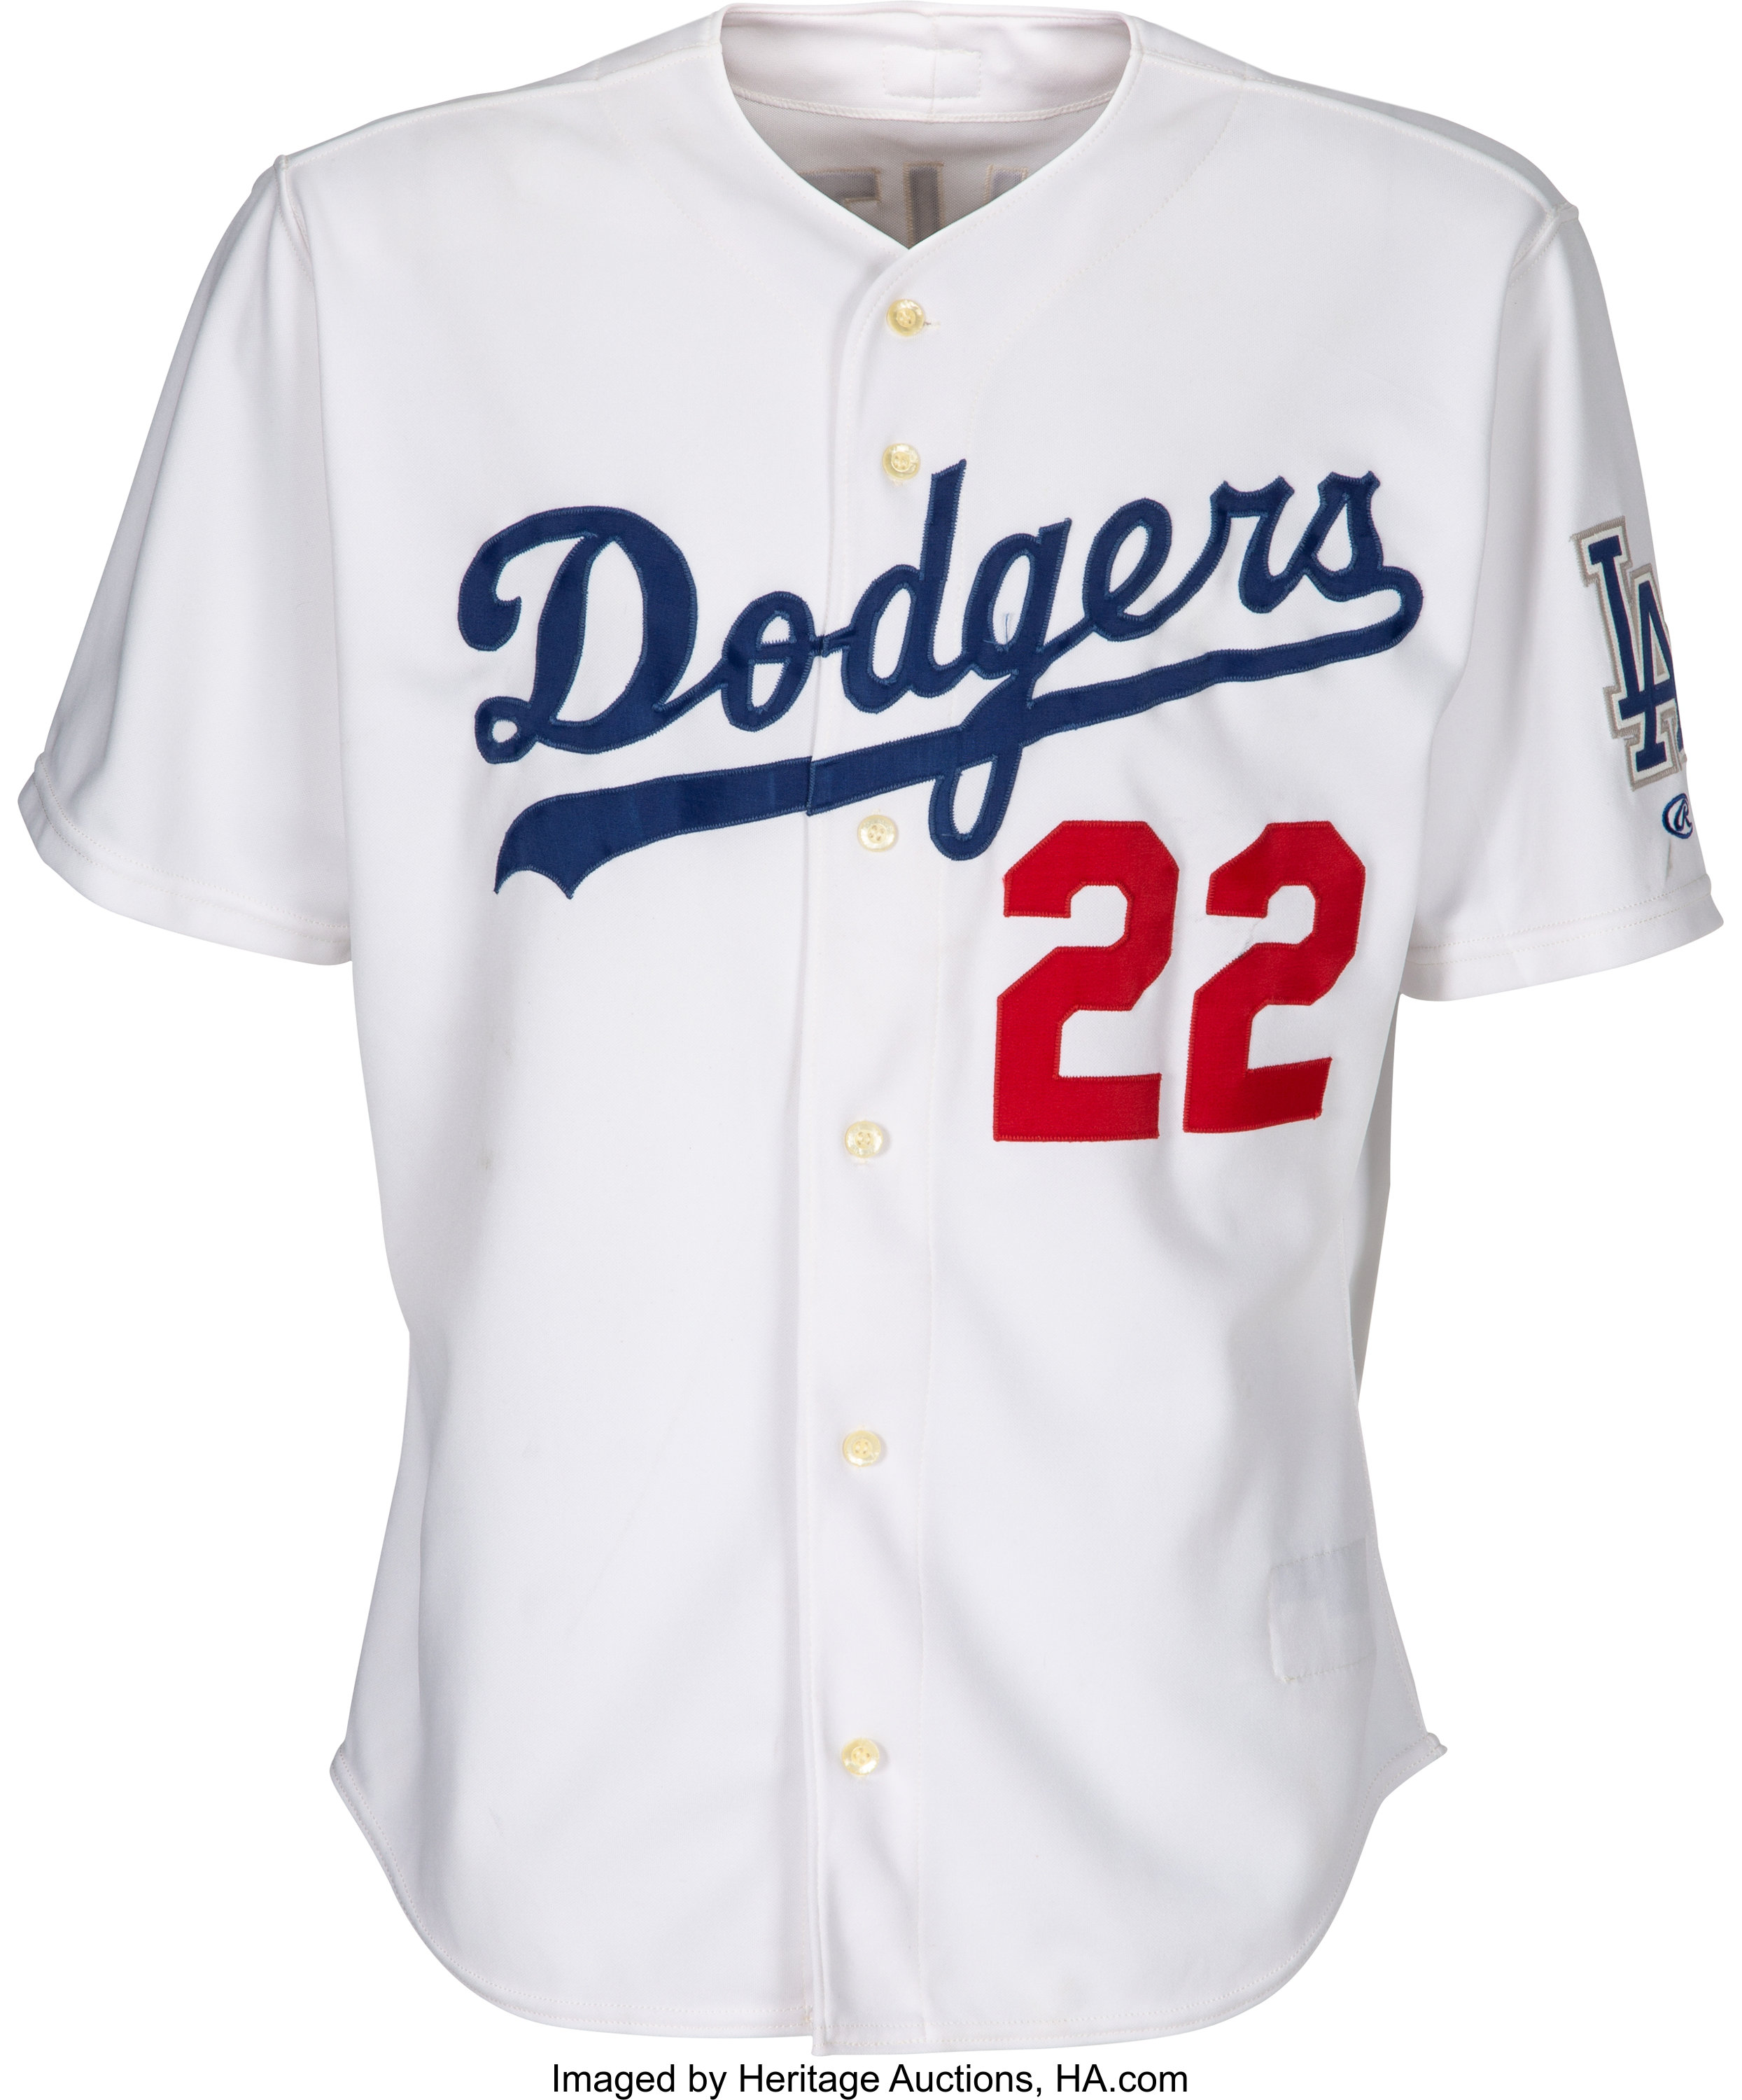 2000 Los Angeles Dodgers Game Worn Jersey from The Devon White